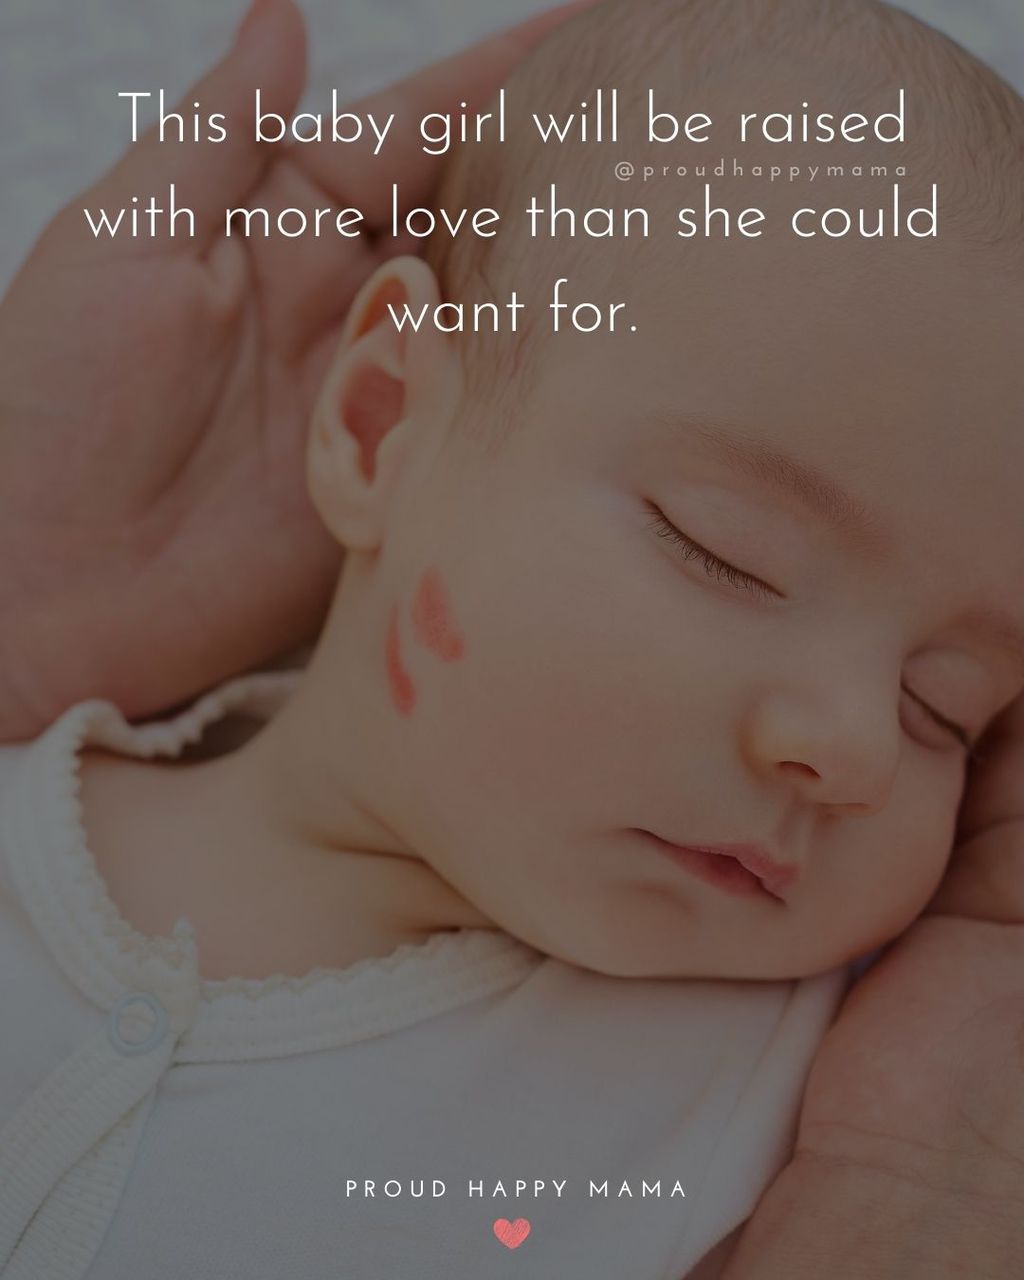 Baby Girl Quotes - This baby girl will be raised with more love than she could want for.